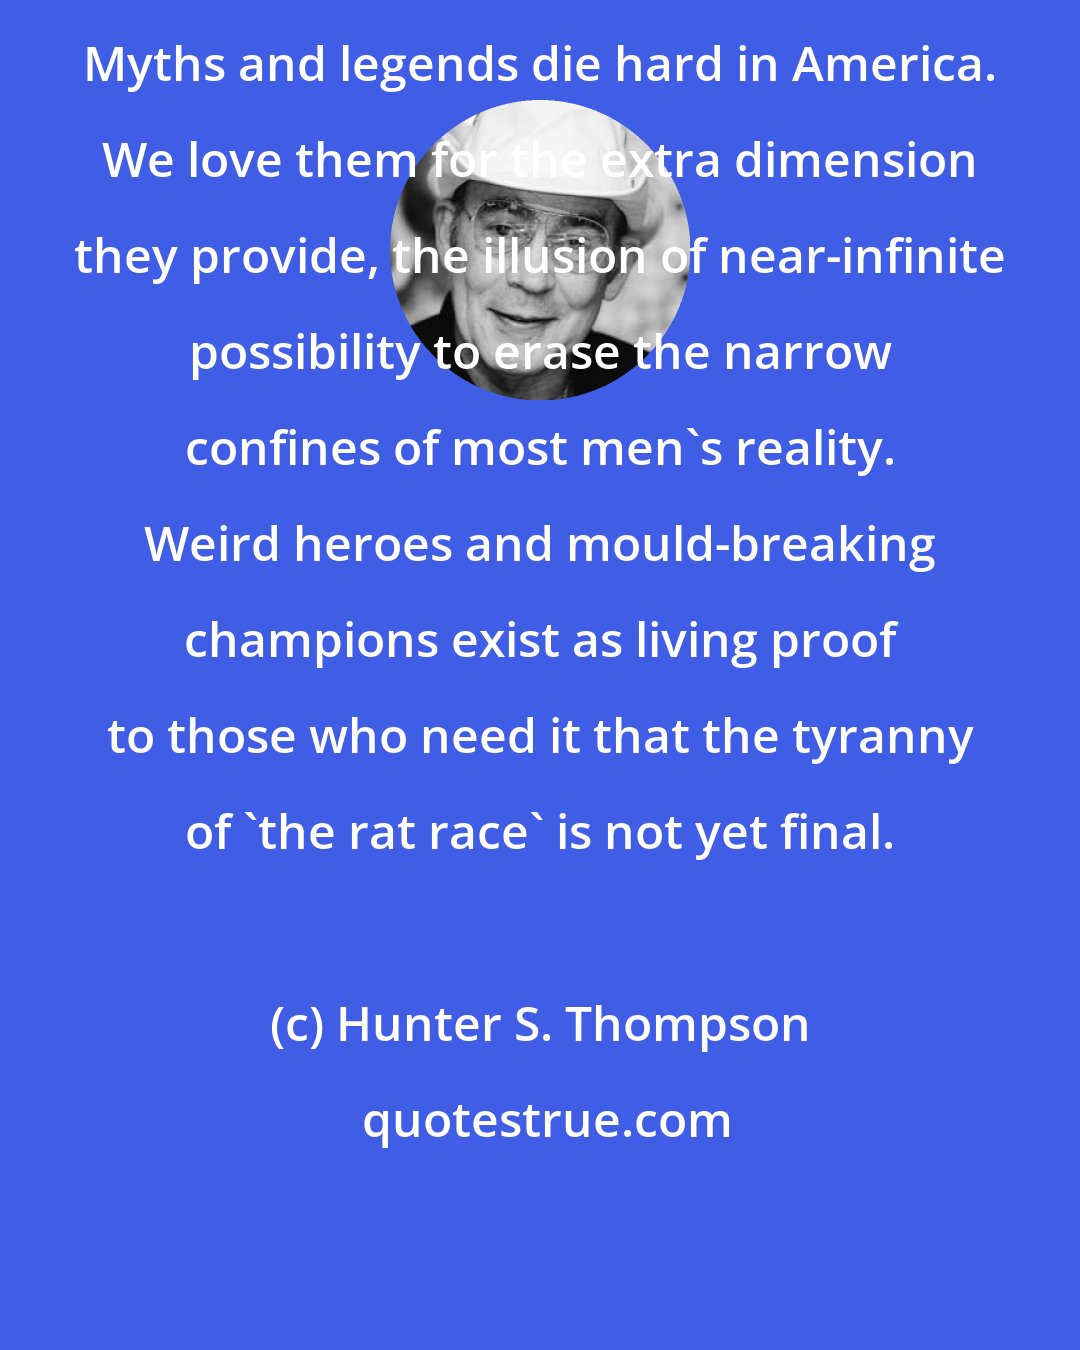 Hunter S. Thompson: Myths and legends die hard in America. We love them for the extra dimension they provide, the illusion of near-infinite possibility to erase the narrow confines of most men's reality. Weird heroes and mould-breaking champions exist as living proof to those who need it that the tyranny of 'the rat race' is not yet final.